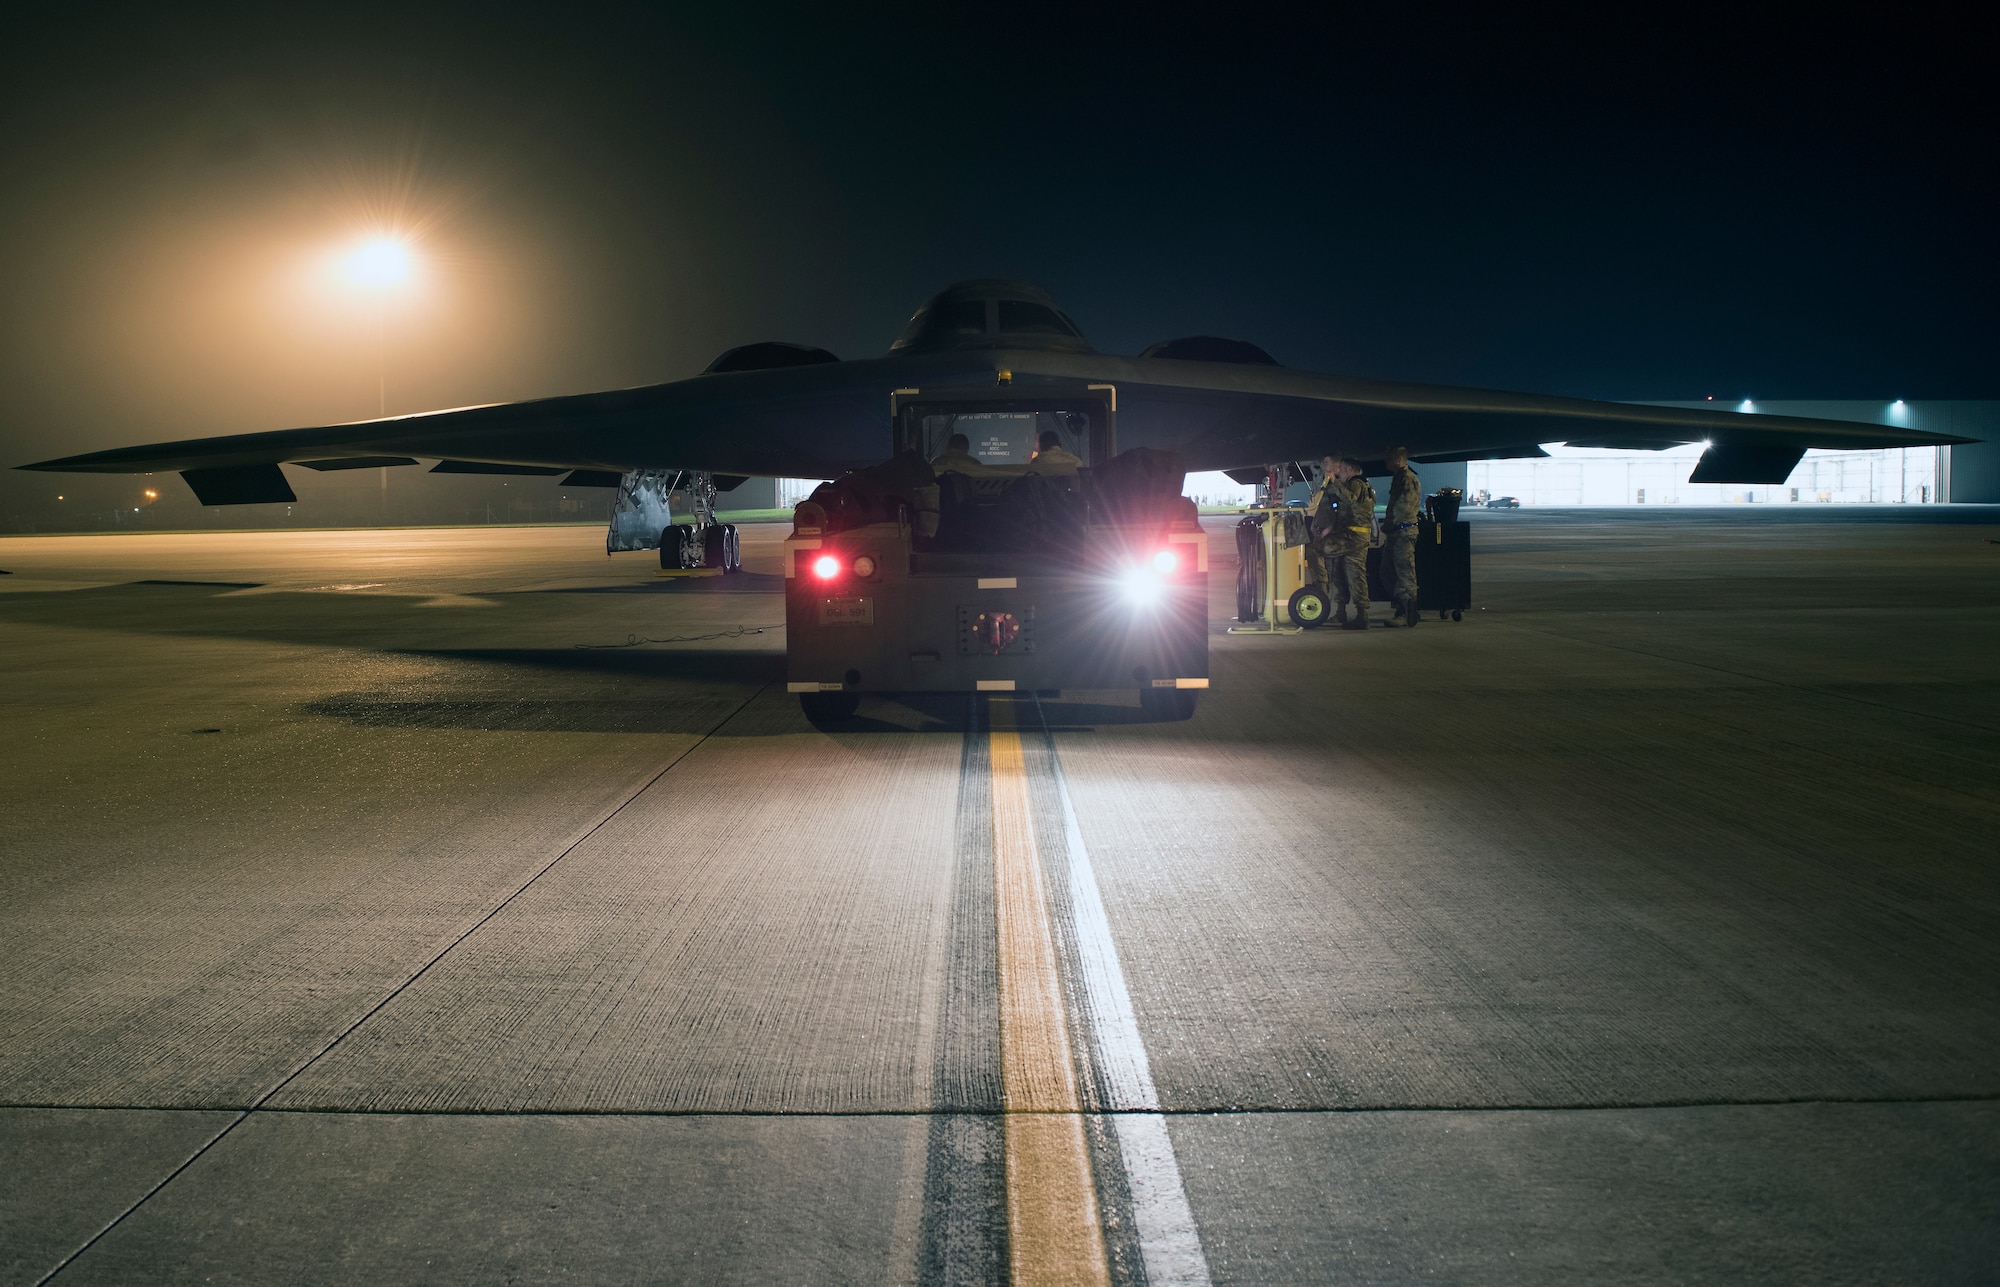 Crew chiefs assigned to the 509th Bomb Wing at Whiteman Air Force Base, Missouri, prepare a B-2 Spirit to be towed into a hangar at Royal Air Base Fairford, England, on Aug. 27, 2019. A Bomber Task Force deployment of B-2 Spirit stealth bomber aircraft, Airmen and support equipment from the 509th Bomb Wing at Whiteman AFB arrived in the U.S. European Command area of operations for a deployment to conduct theater integration and flying training. The deployment of strategic bombers to the United Kingdom helps exercise RAF Fairford as a forward operating base for the unit, ensuring they are engaged, postured and ready with credible force to assure, deter and defend the U.S. and its allies in an increasingly complex security environment. (U.S. Air Force photo by Staff Sgt. Kayla White)